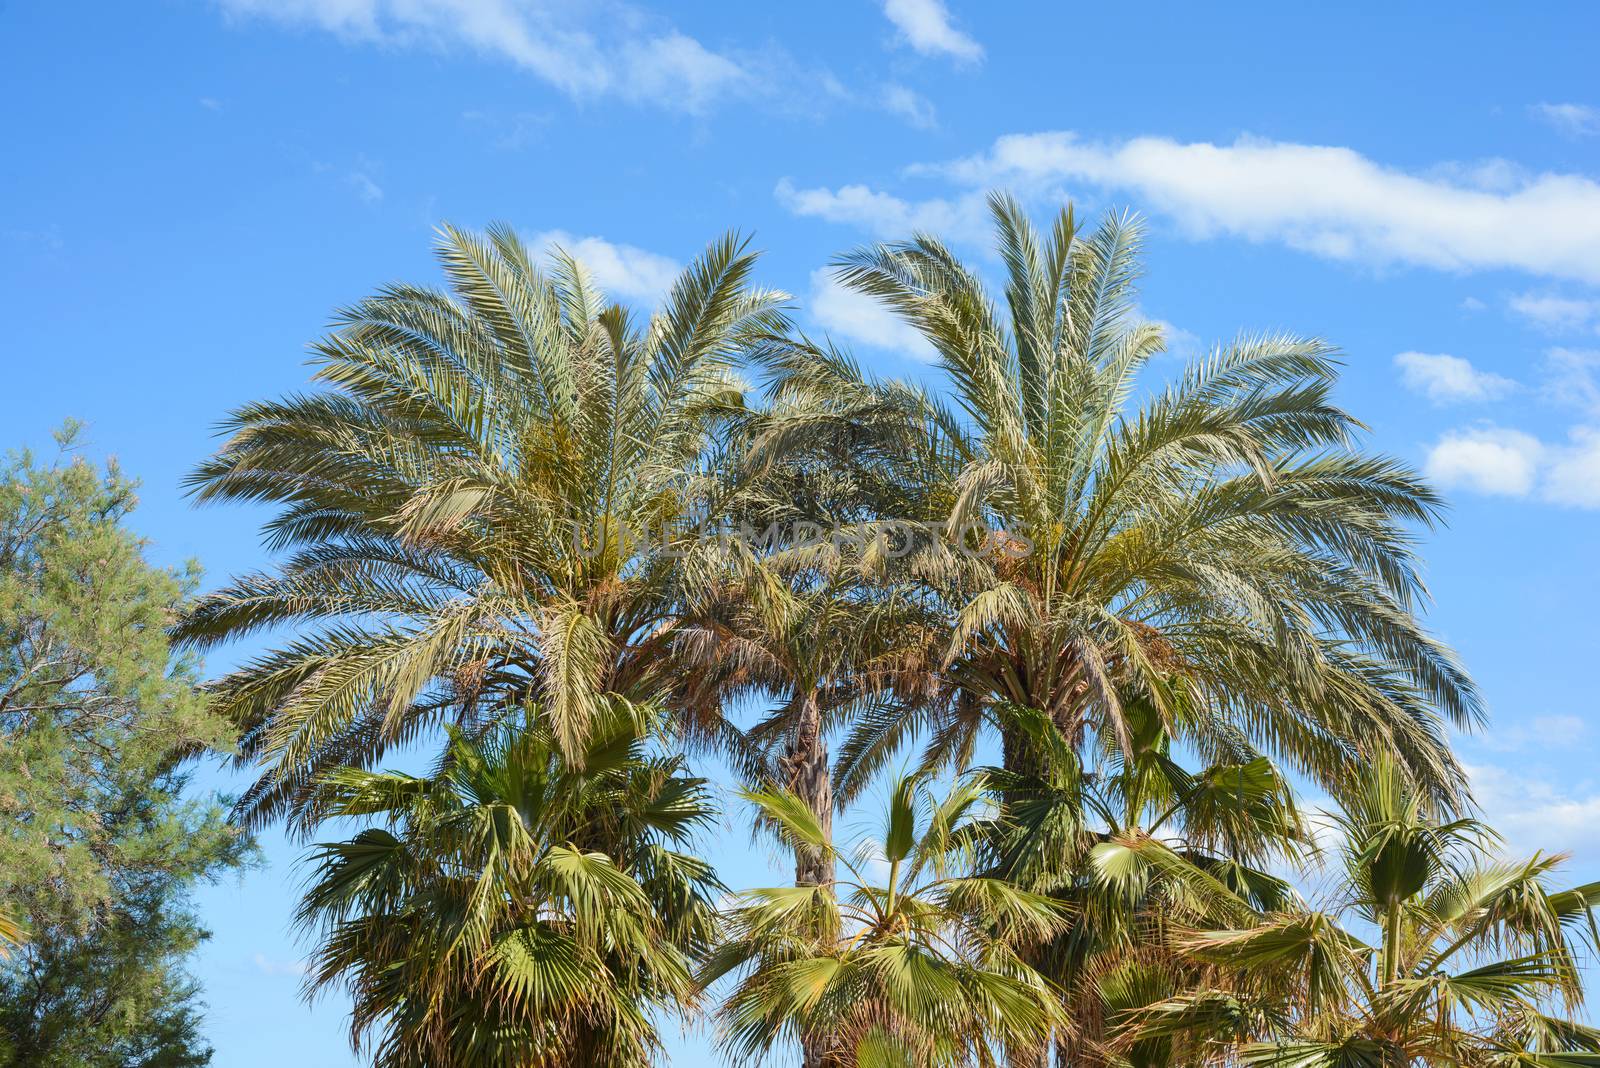 Palm trees against a blue sky and clouds